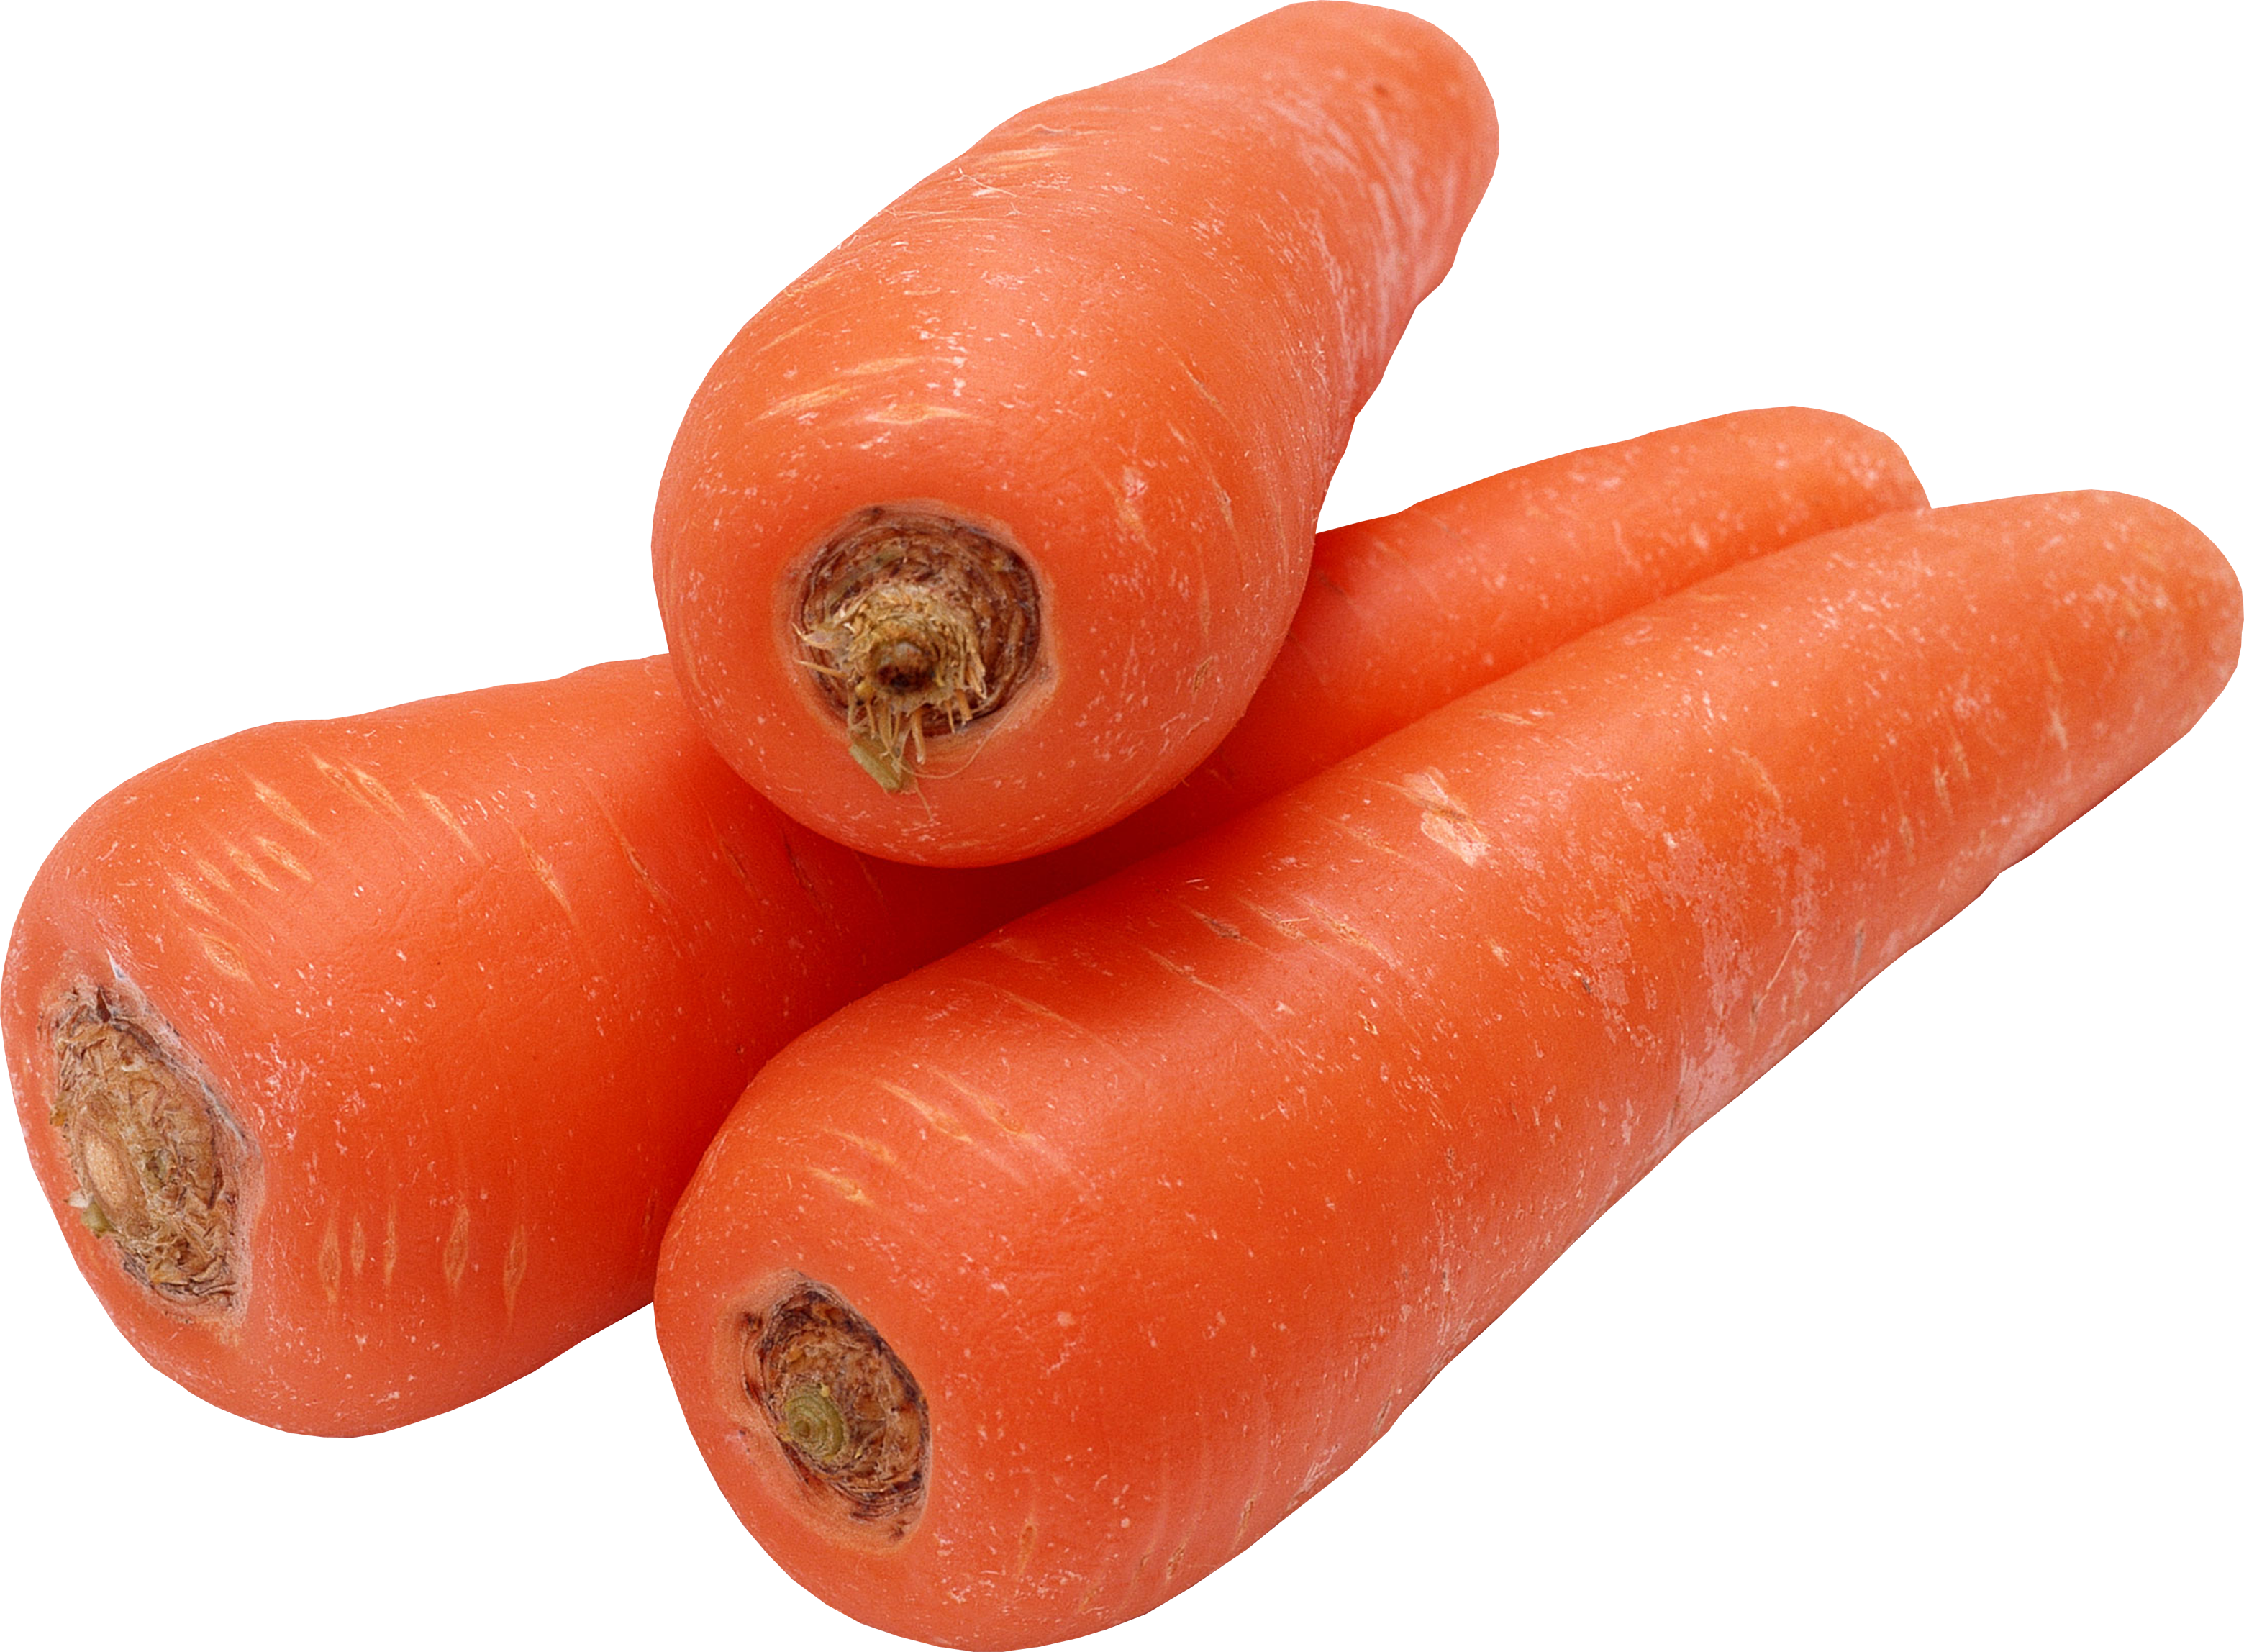 Carrot Cutting Pieces PNG